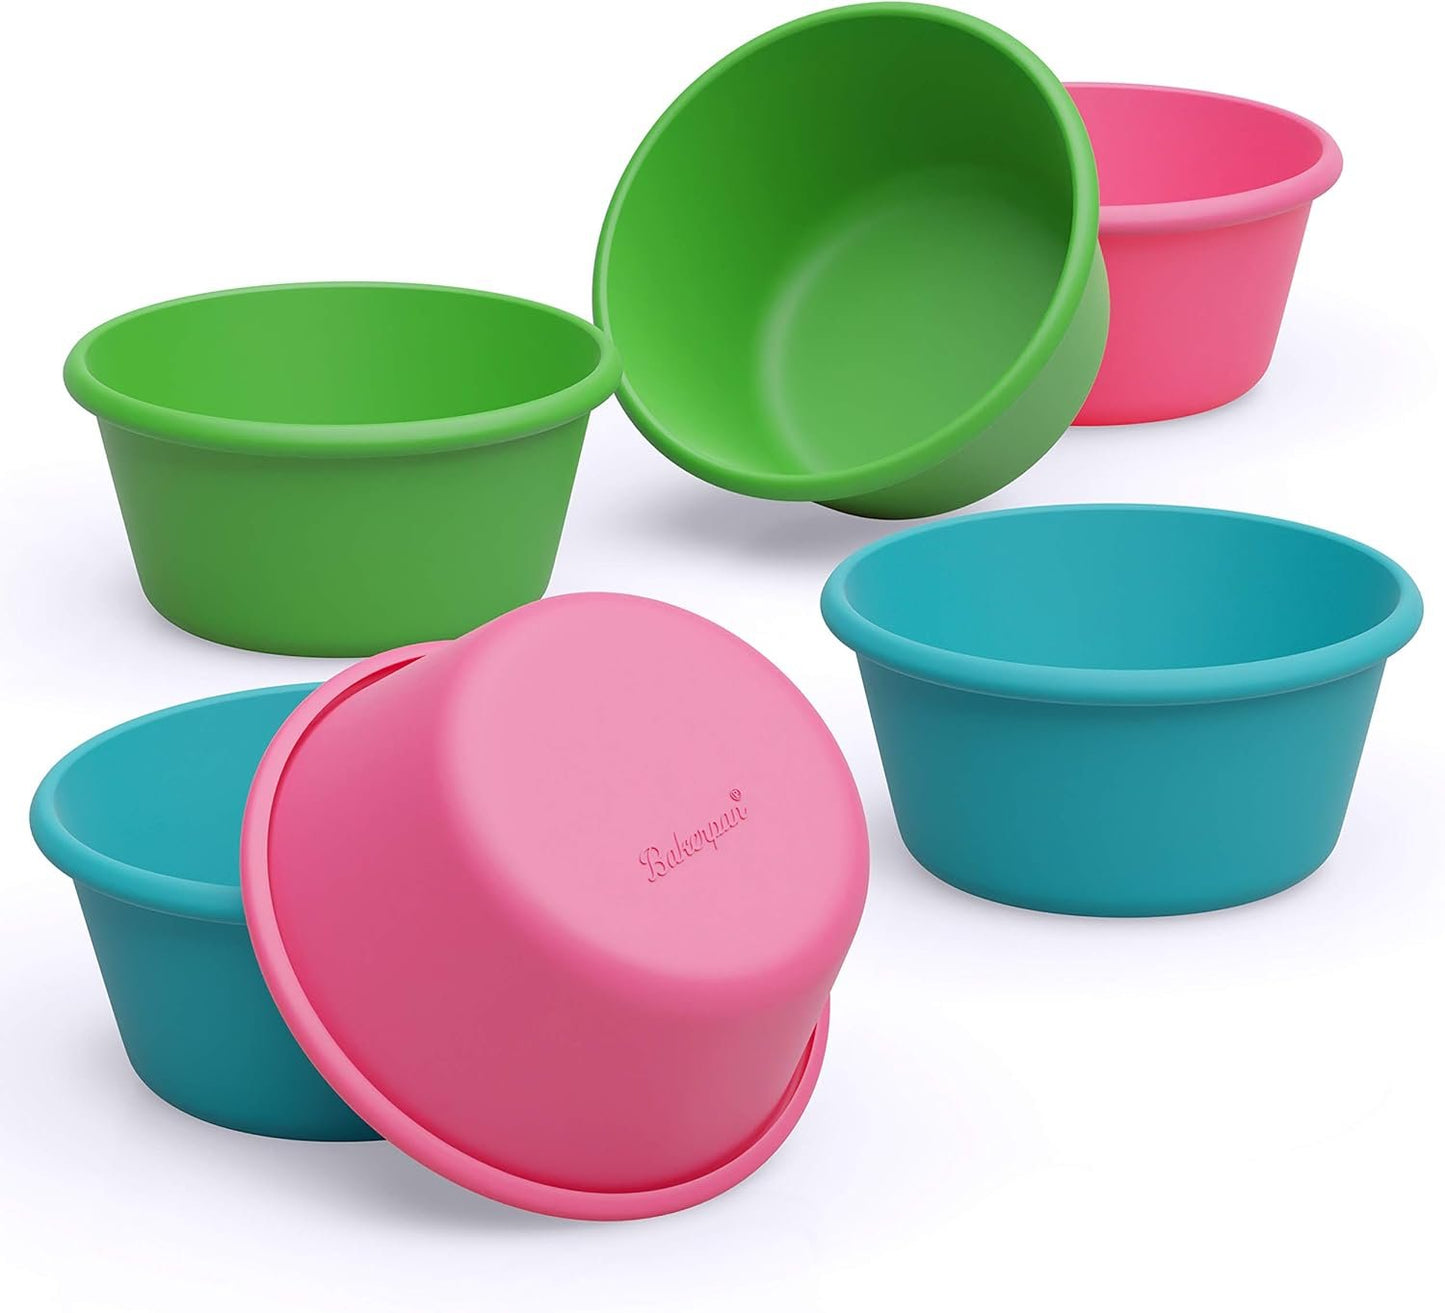 Bakerpan Silicone Jumbo Muffin Cups For Baking, Large Air Fryer Muffin Cups